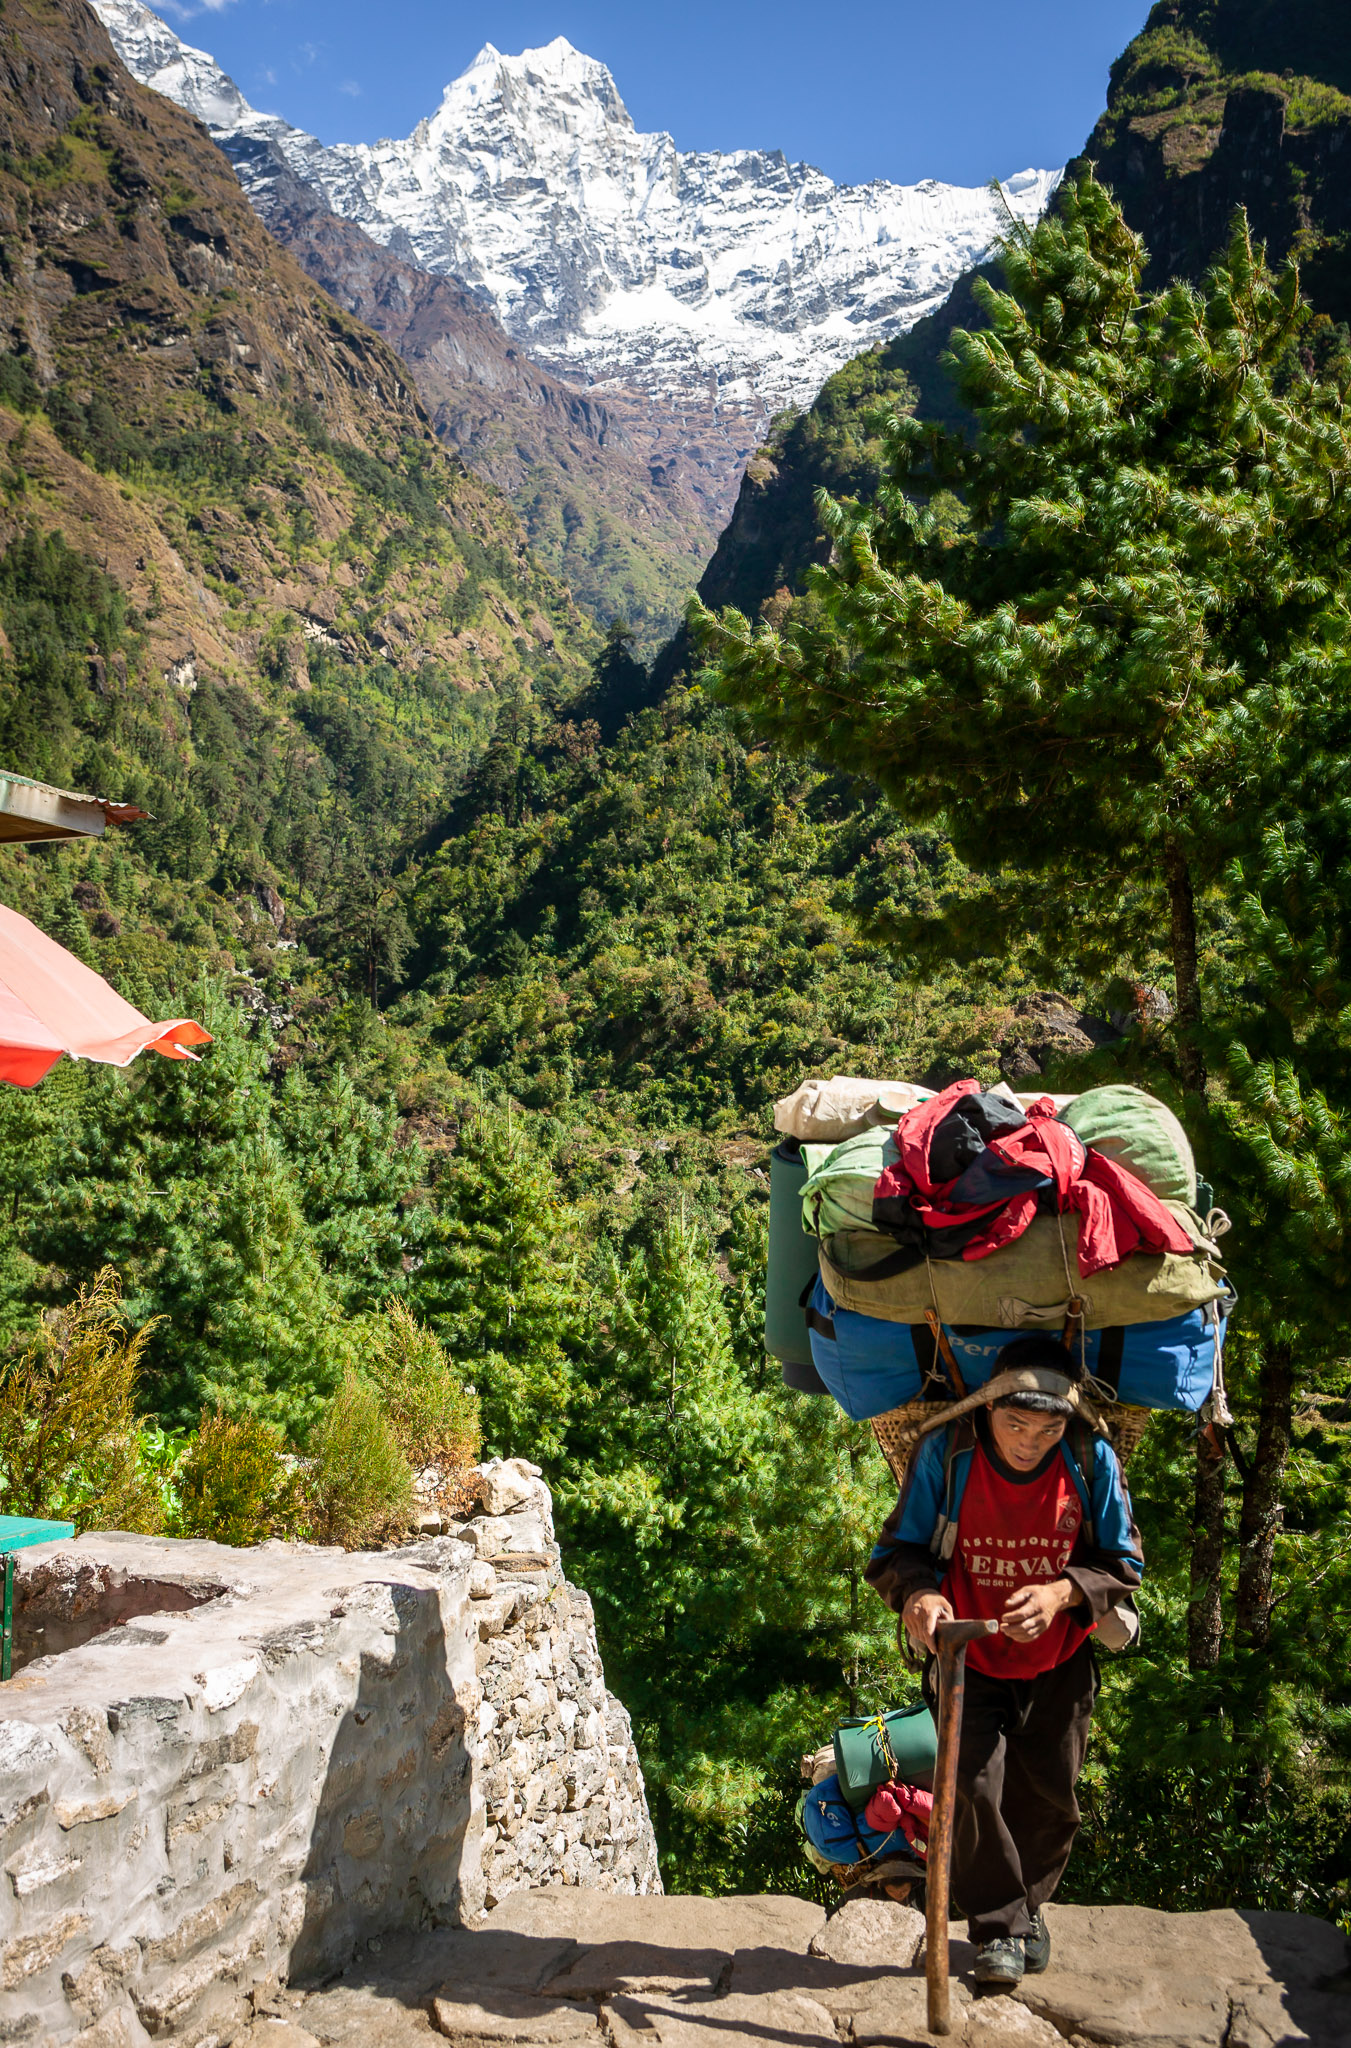 Porters from Nepal's lowlands